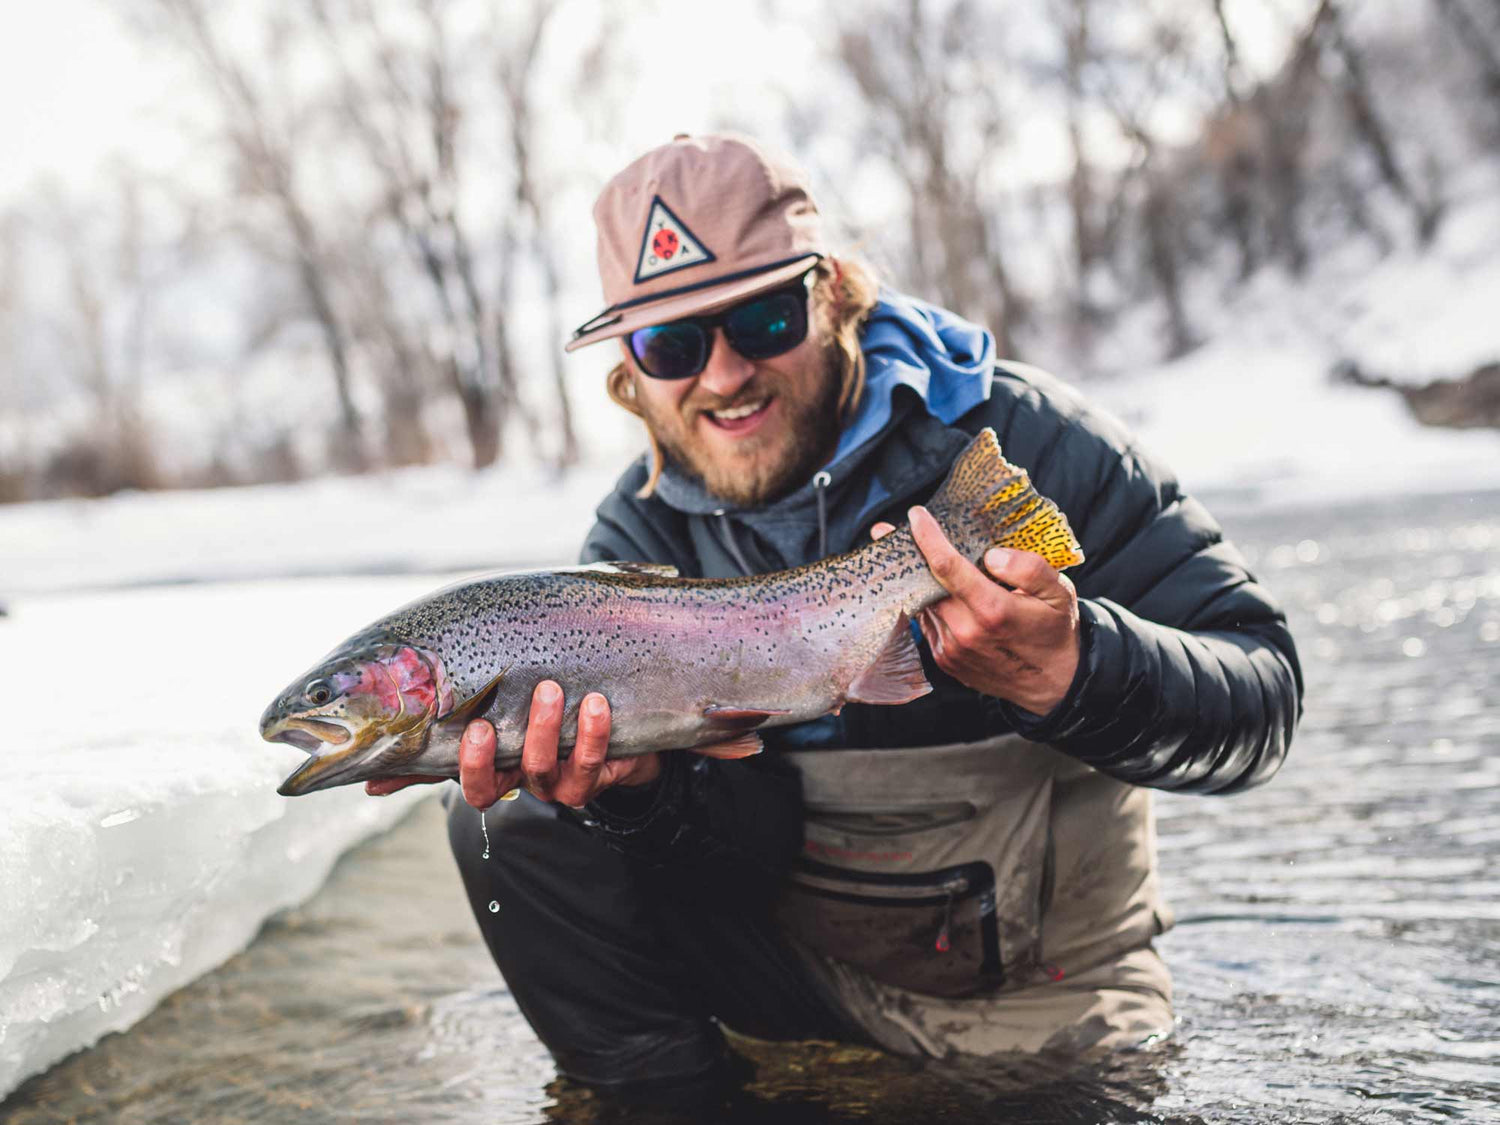 Three Rules of Winter Fly Fishing